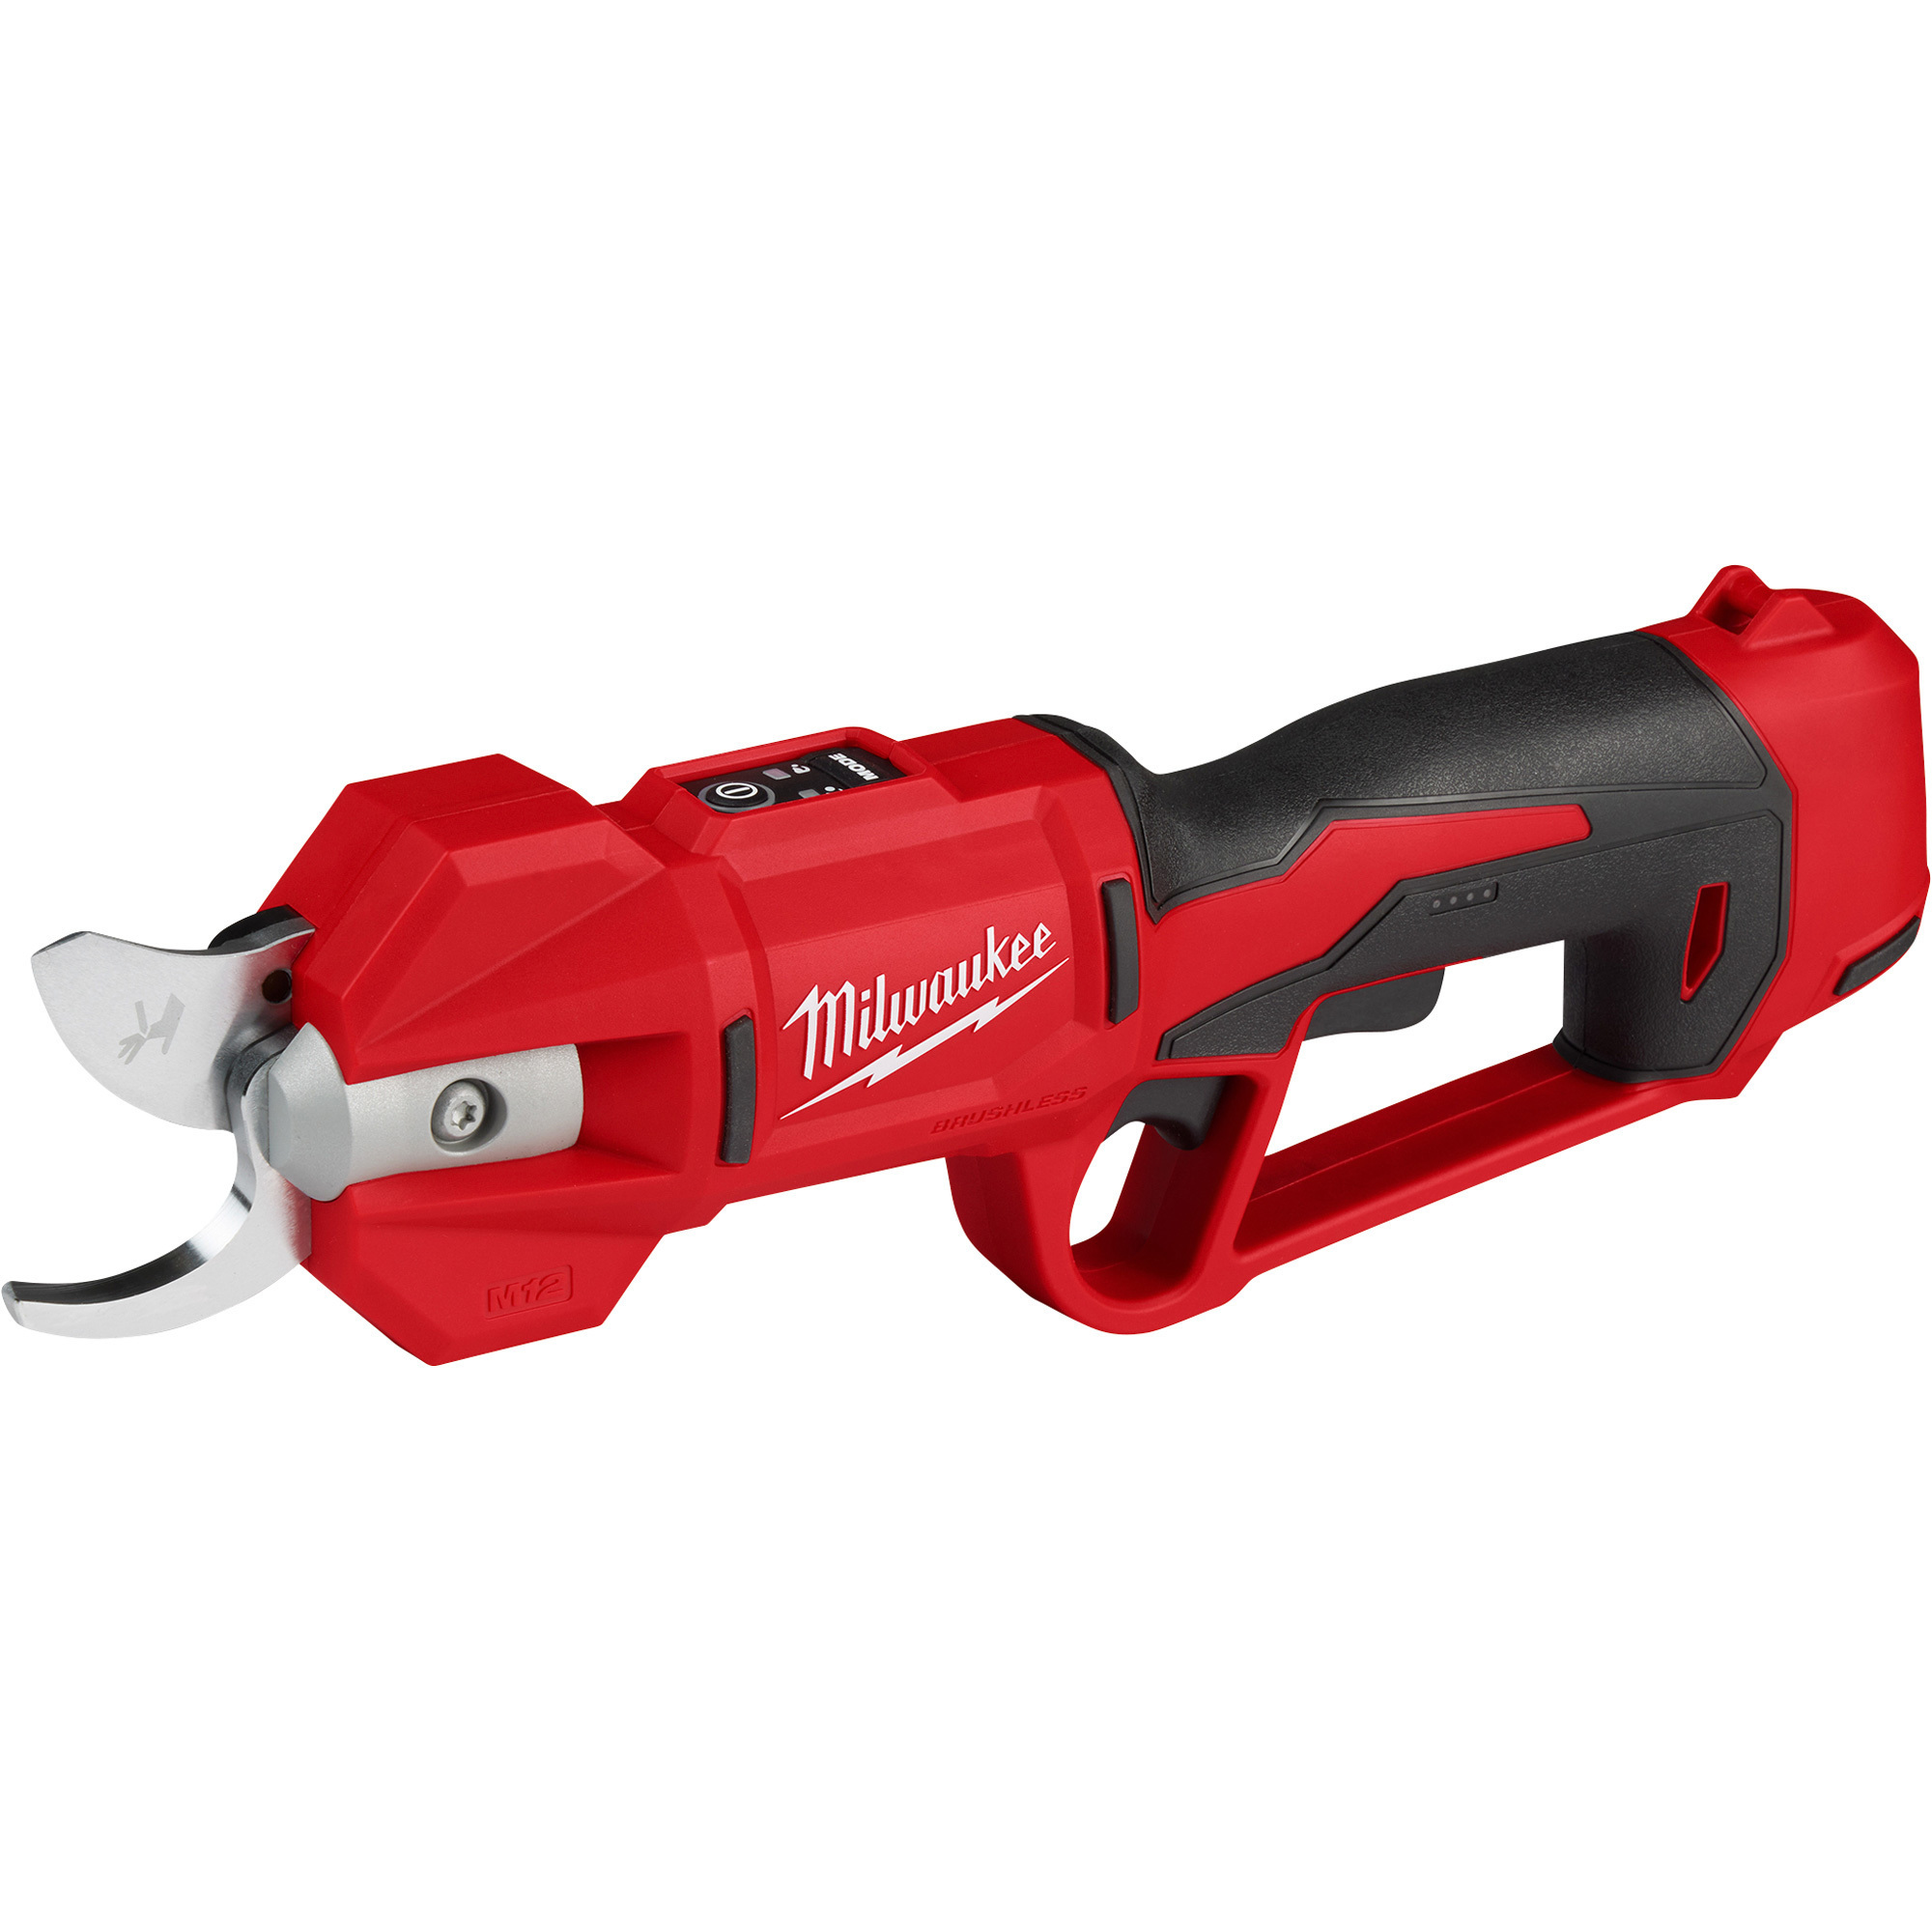 Milwaukee M12 Brushless Pruning Shears, Tool Only, Model 2534-20